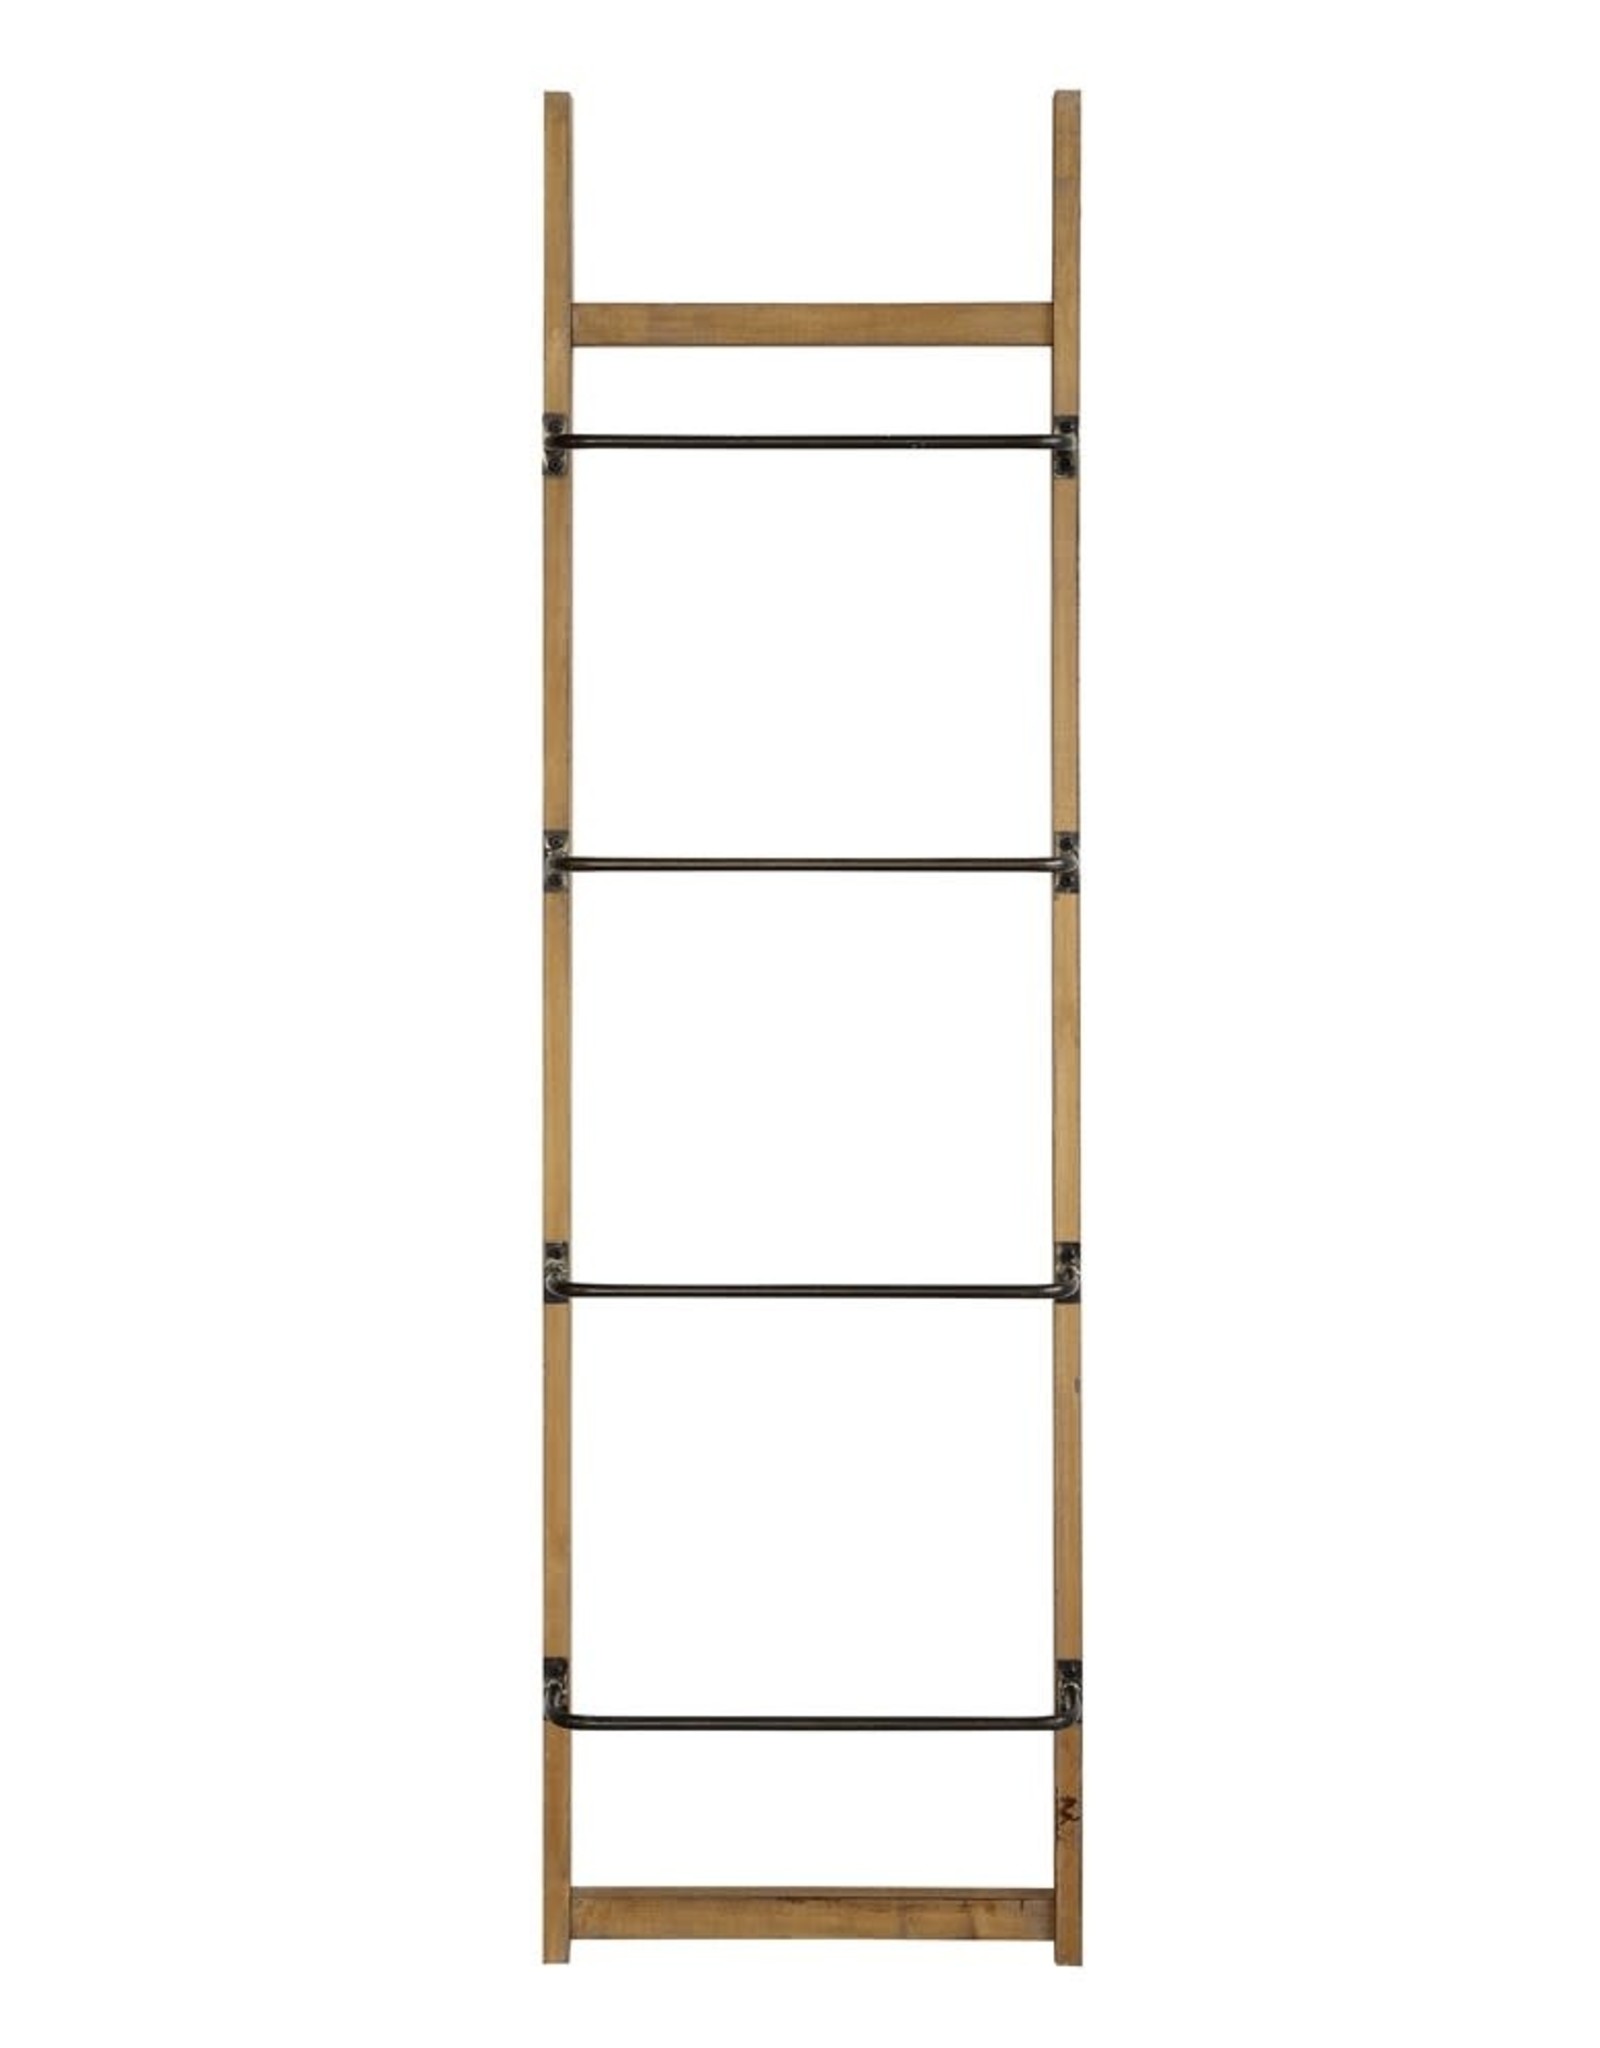 Ladder Wall Rack Metal and Wood With 4 Bars 5.25 X 19.75 X 70.75